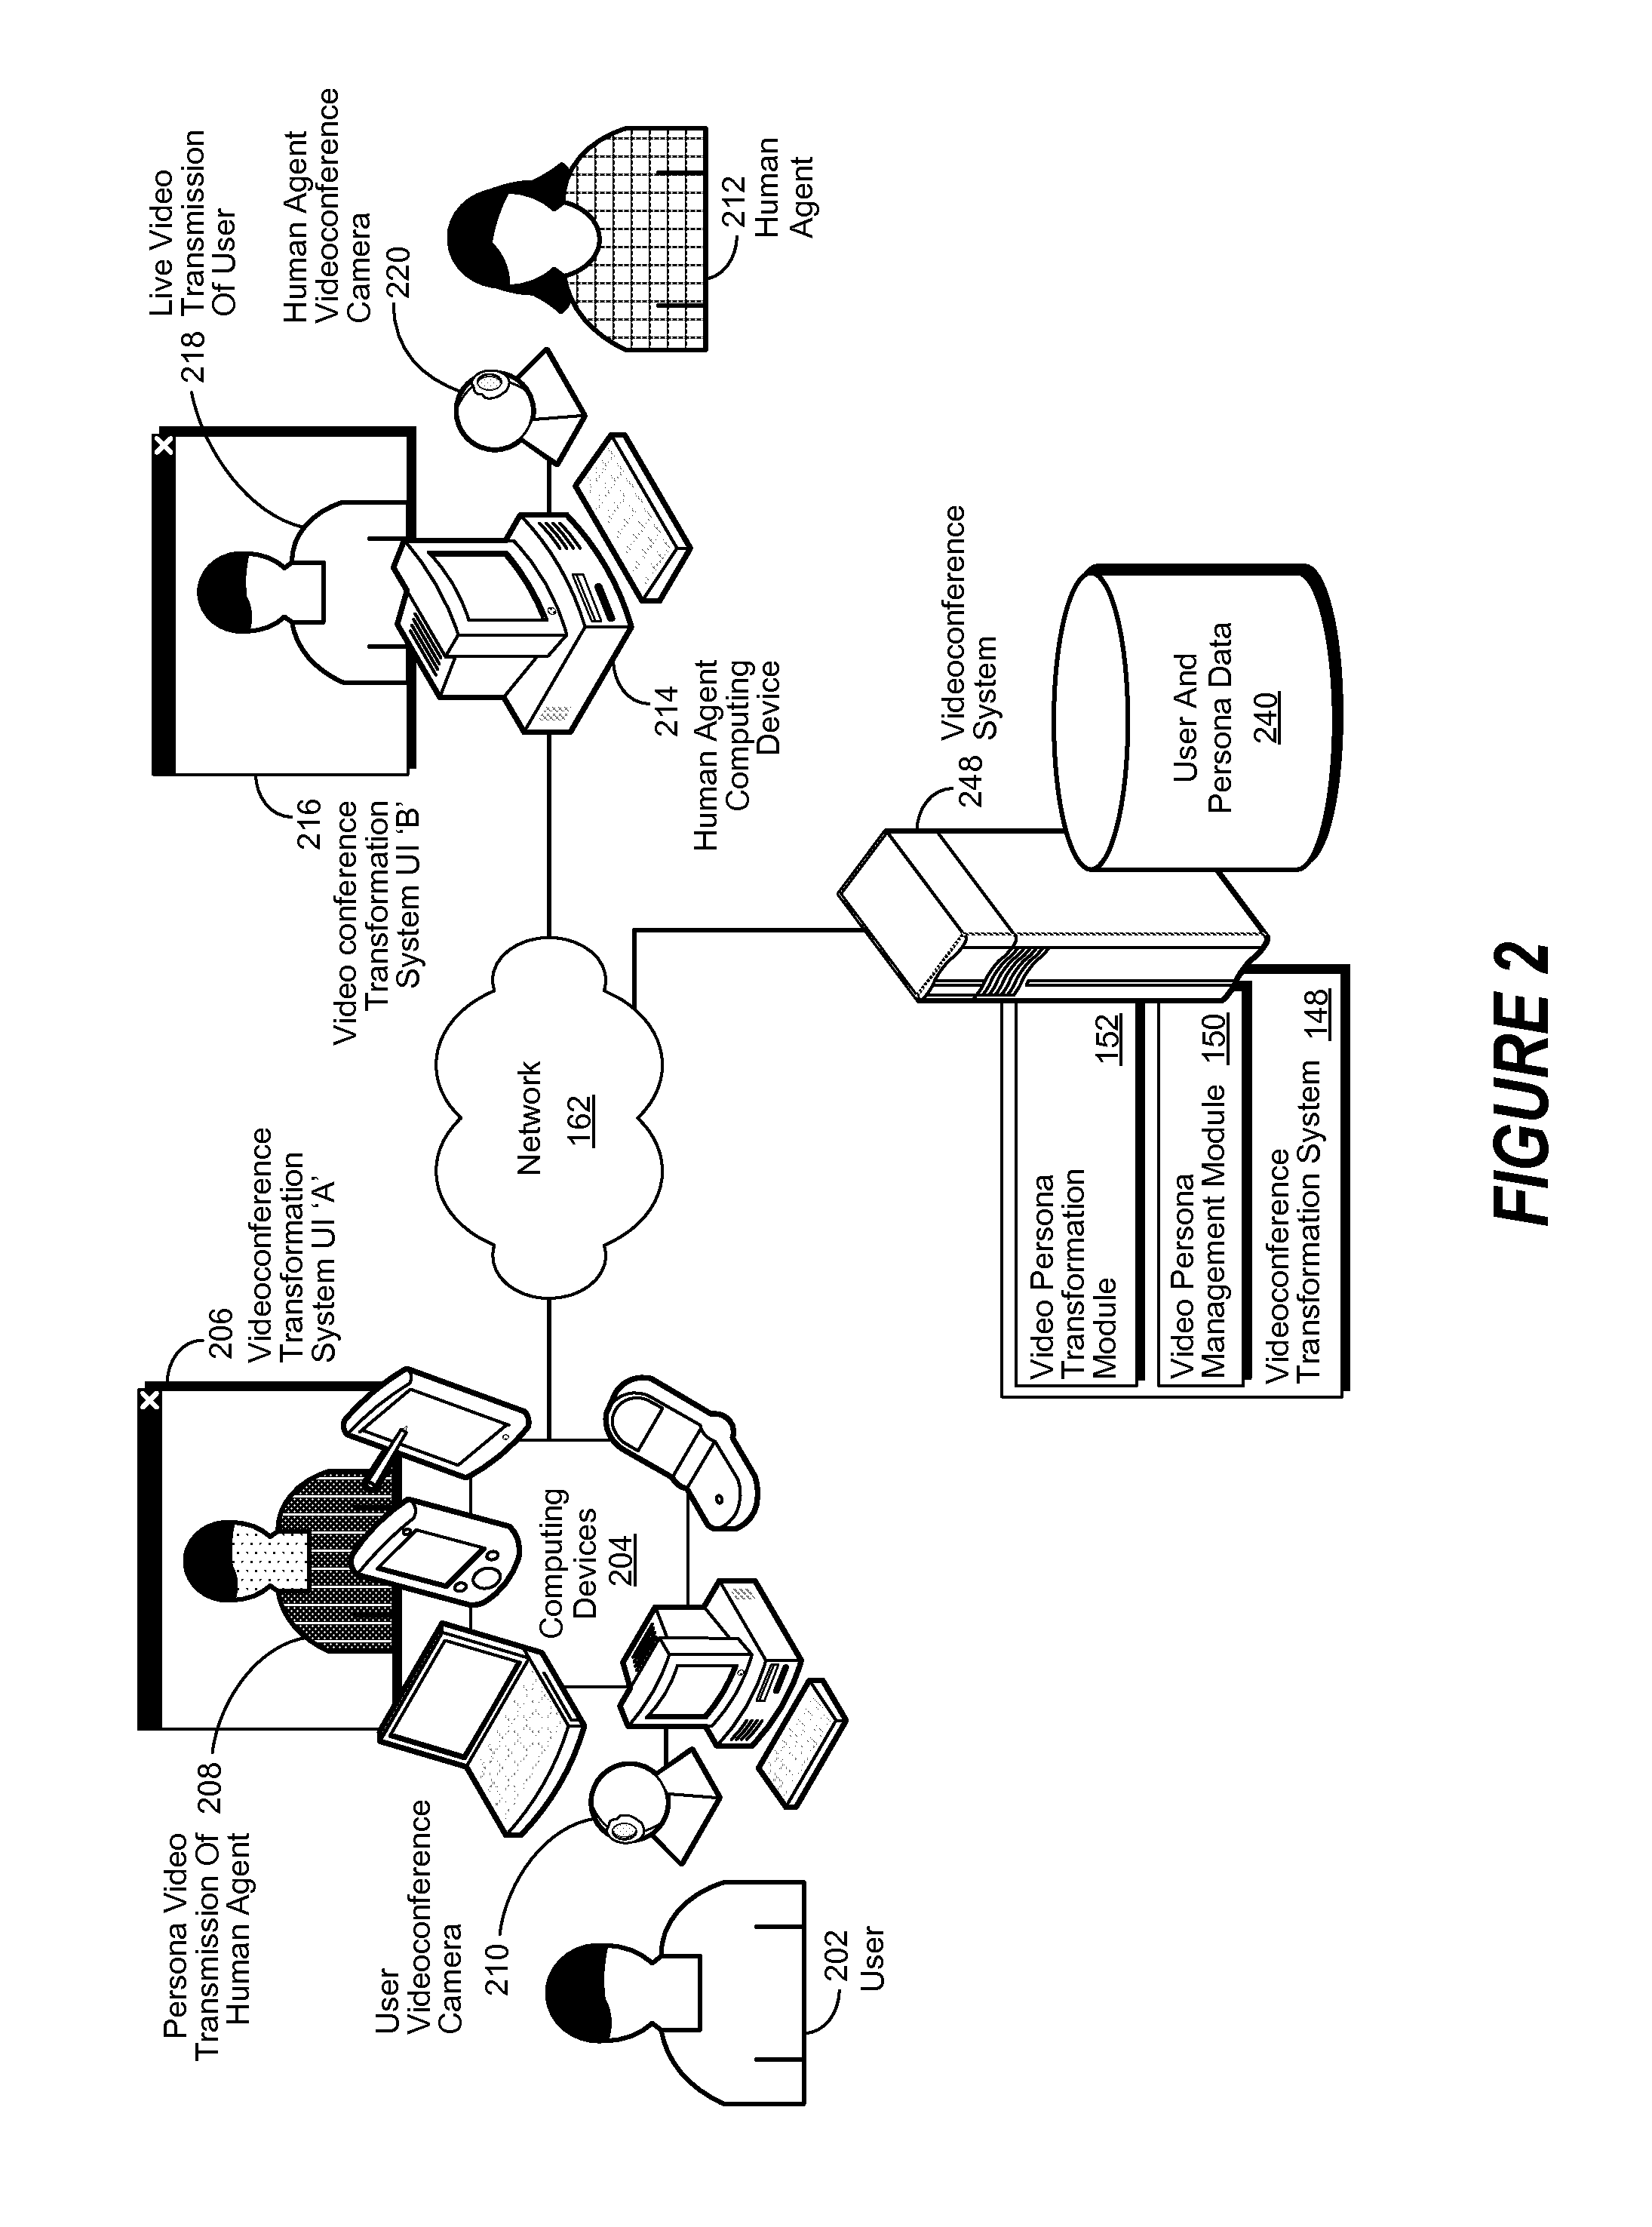 Systems and methods for videophone identity cloaking